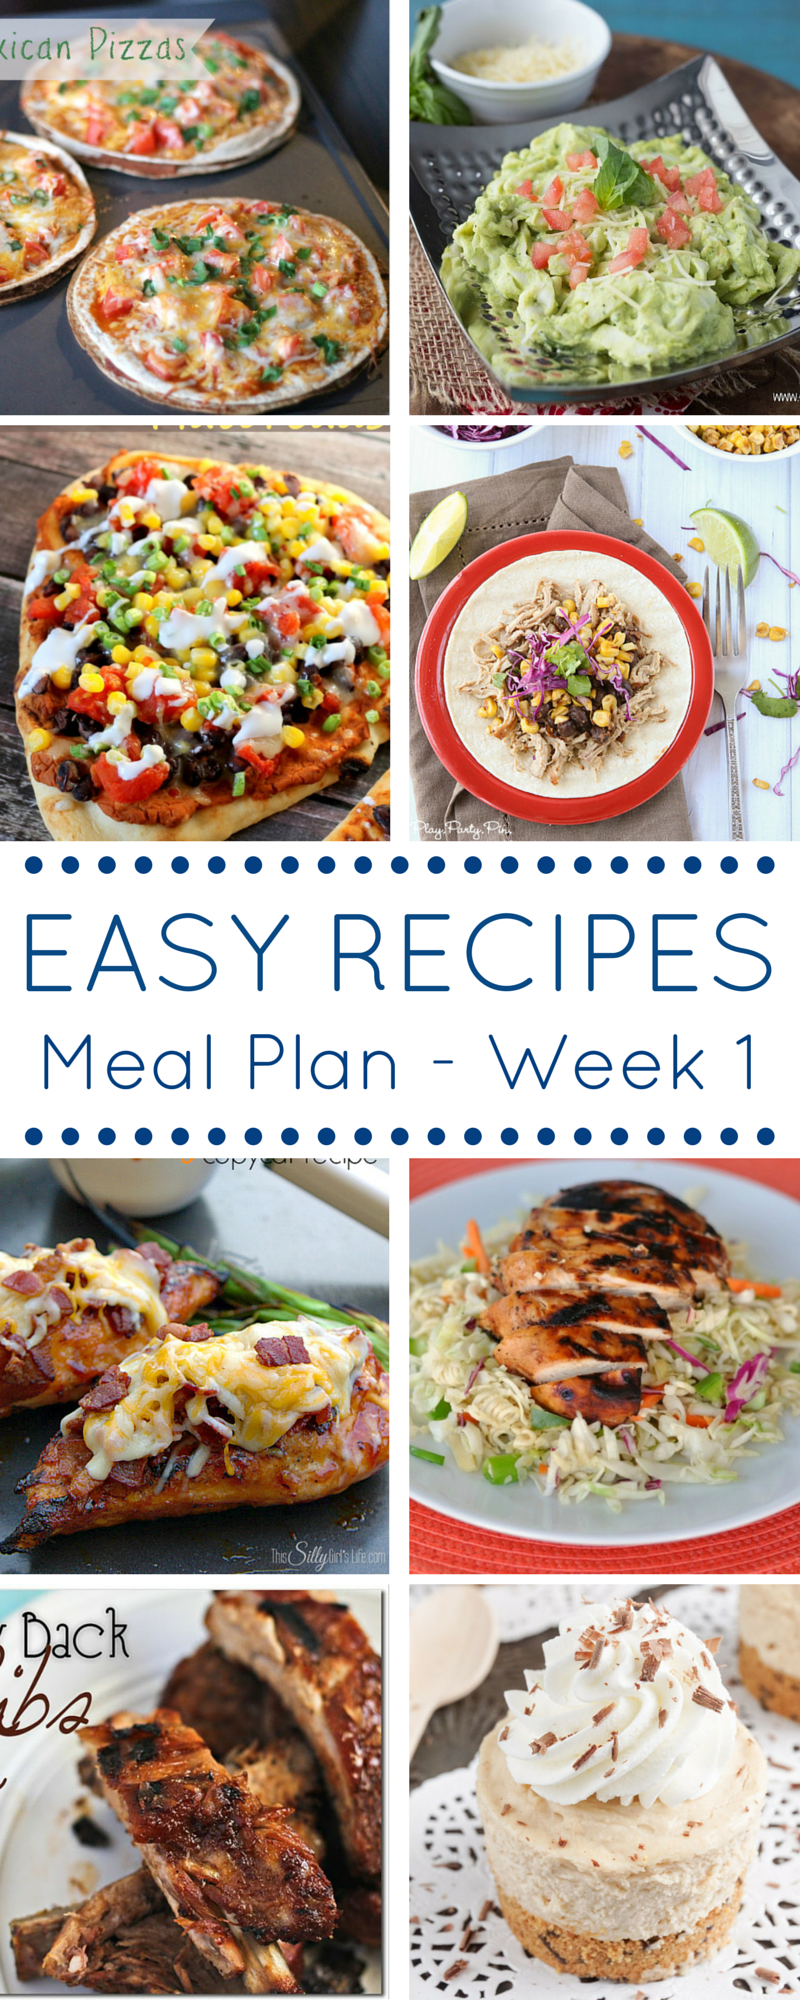 7 Bloggers bringing you 8 weekly recipes - The Easy Dinner Recipes Meal Plan .